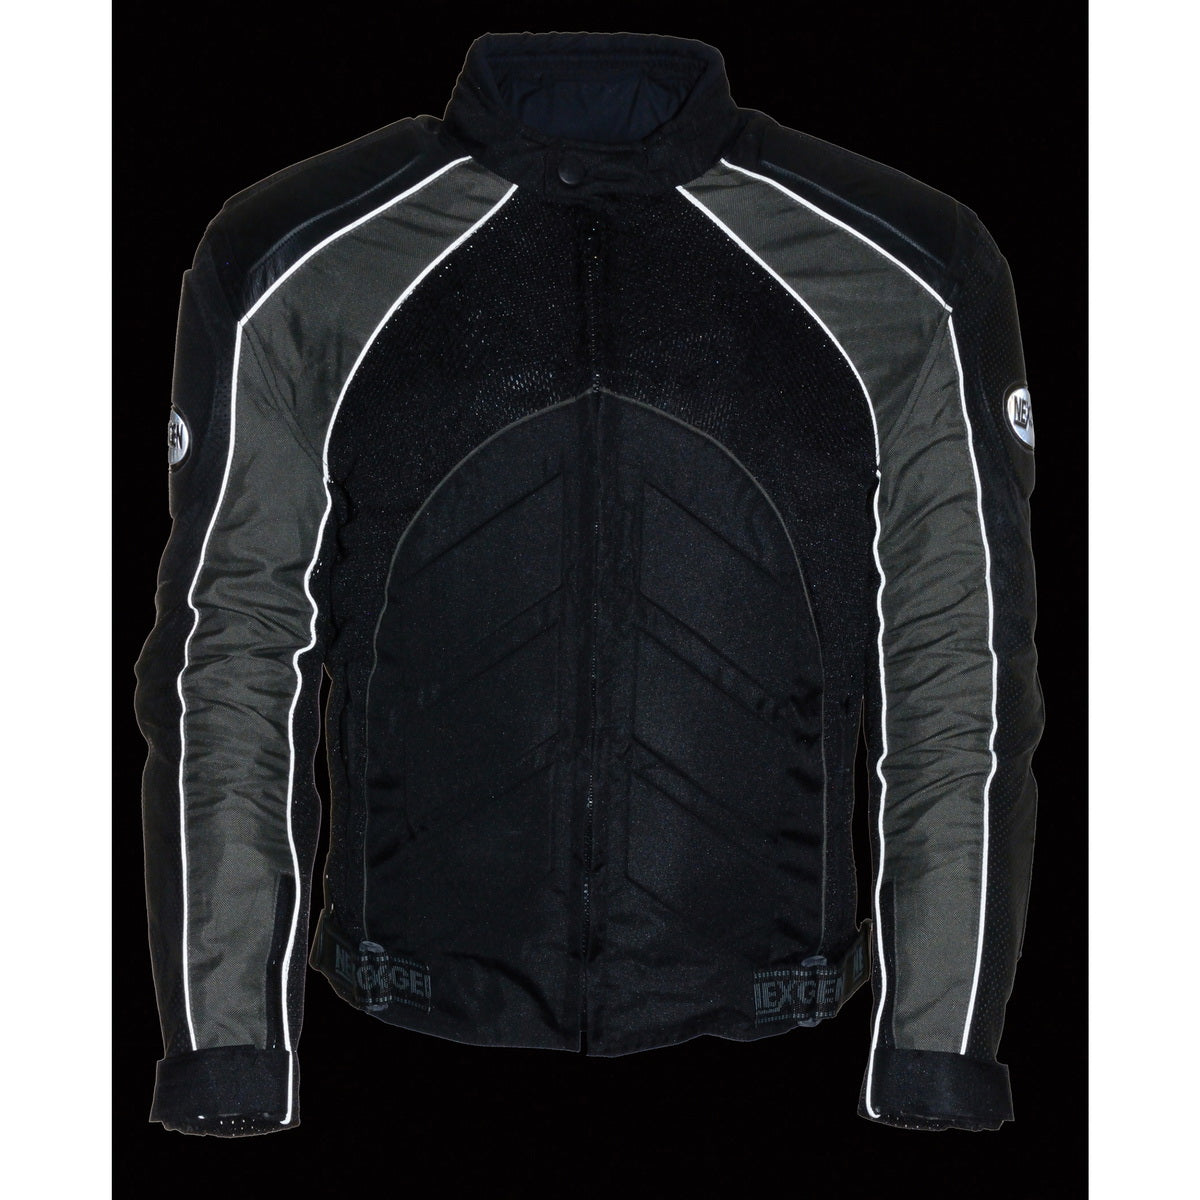 NexGen SH2153 Men's Black and Grey Armored Moto Textile and Leather Combo Jacket